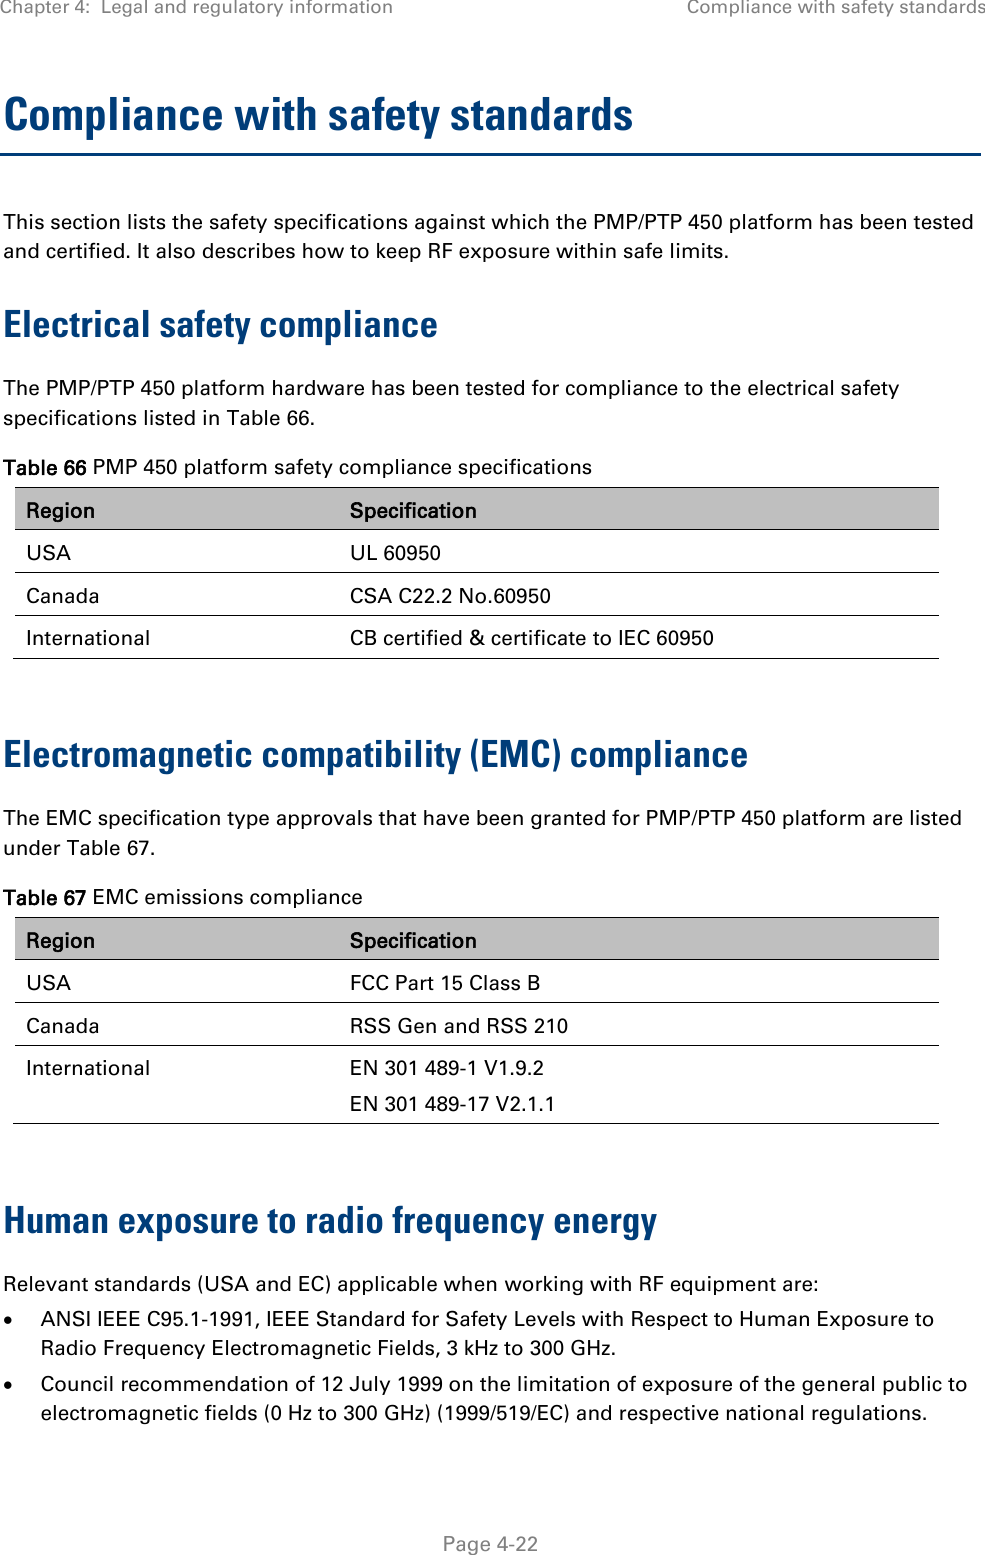 Chapter 4:  Legal and regulatory information Compliance with safety standards   Page 4-22 Compliance with safety standards This section lists the safety specifications against which the PMP/PTP 450 platform has been tested and certified. It also describes how to keep RF exposure within safe limits. Electrical safety compliance  The PMP/PTP 450 platform hardware has been tested for compliance to the electrical safety specifications listed in Table 66. Table 66 PMP 450 platform safety compliance specifications Region Specification USA UL 60950 Canada CSA C22.2 No.60950 International CB certified &amp; certificate to IEC 60950  Electromagnetic compatibility (EMC) compliance The EMC specification type approvals that have been granted for PMP/PTP 450 platform are listed under Table 67. Table 67 EMC emissions compliance Region Specification USA FCC Part 15 Class B Canada RSS Gen and RSS 210 International EN 301 489-1 V1.9.2 EN 301 489-17 V2.1.1  Human exposure to radio frequency energy Relevant standards (USA and EC) applicable when working with RF equipment are:  ANSI IEEE C95.1-1991, IEEE Standard for Safety Levels with Respect to Human Exposure to Radio Frequency Electromagnetic Fields, 3 kHz to 300 GHz.  Council recommendation of 12 July 1999 on the limitation of exposure of the general public to electromagnetic fields (0 Hz to 300 GHz) (1999/519/EC) and respective national regulations. 